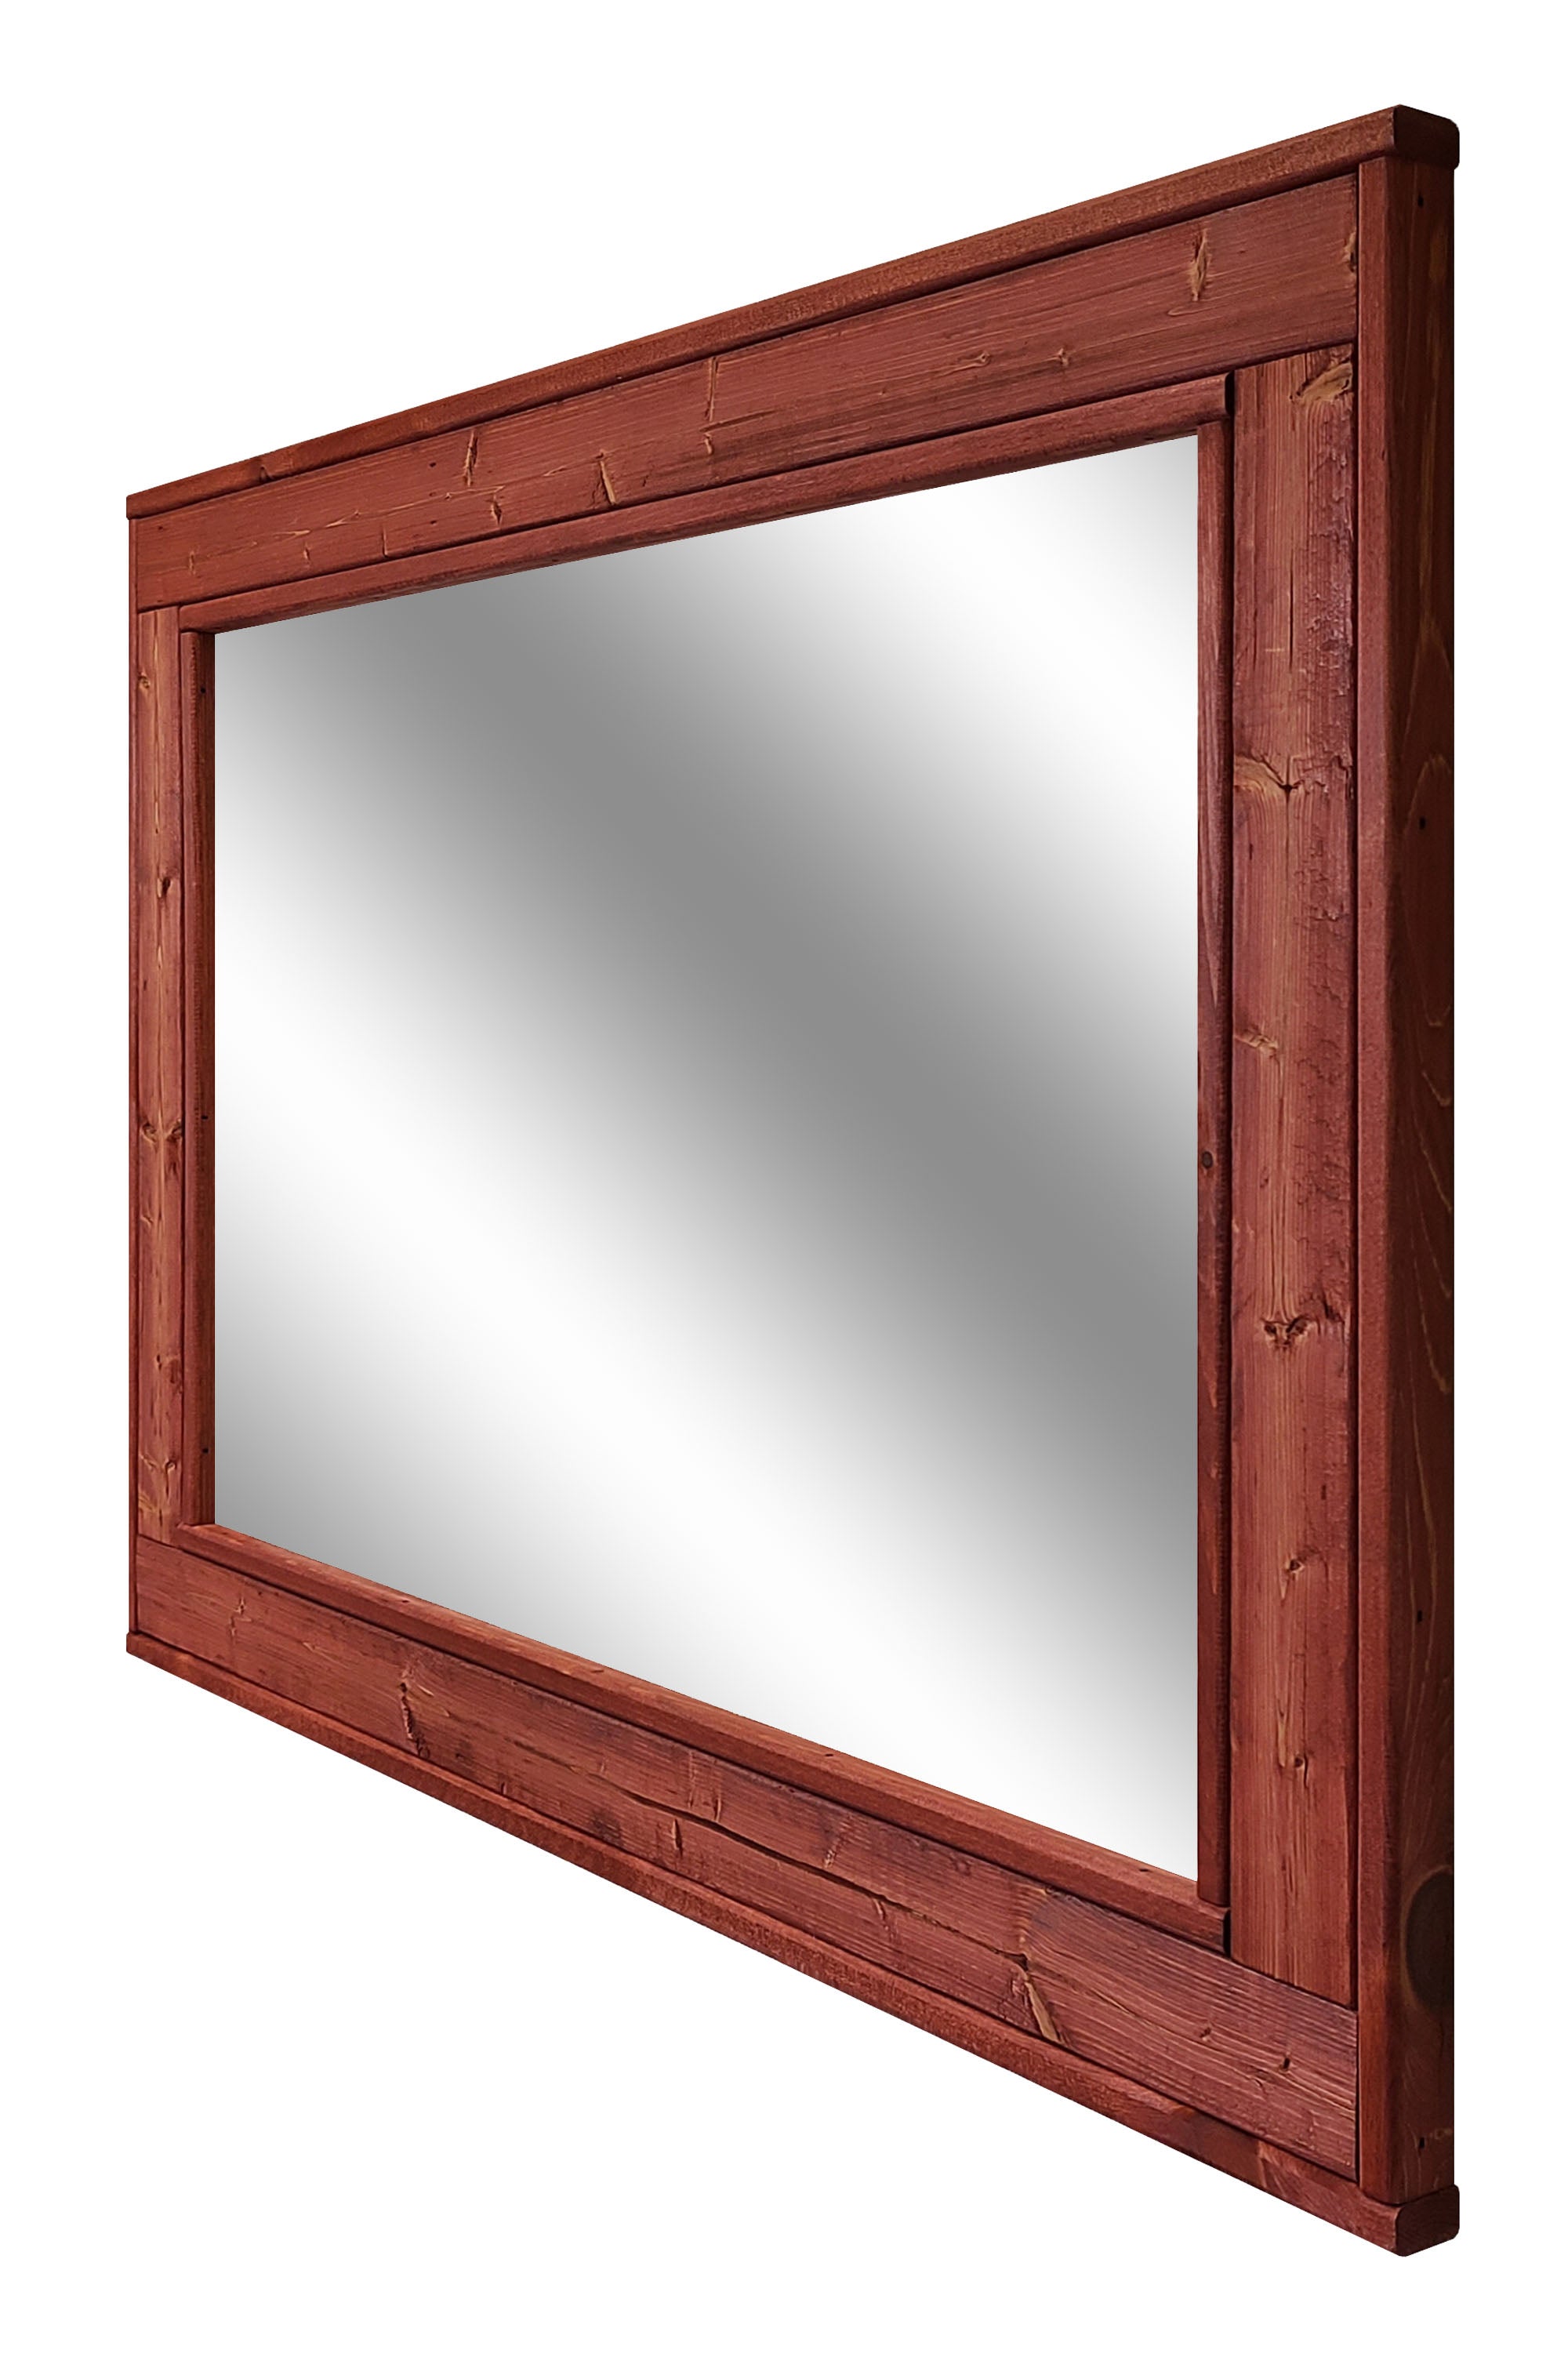 Herringbone Reclaimed Styled Wood Mirror, 20 Stain Colors & 5 Sizes, Shown in Sedona Red 